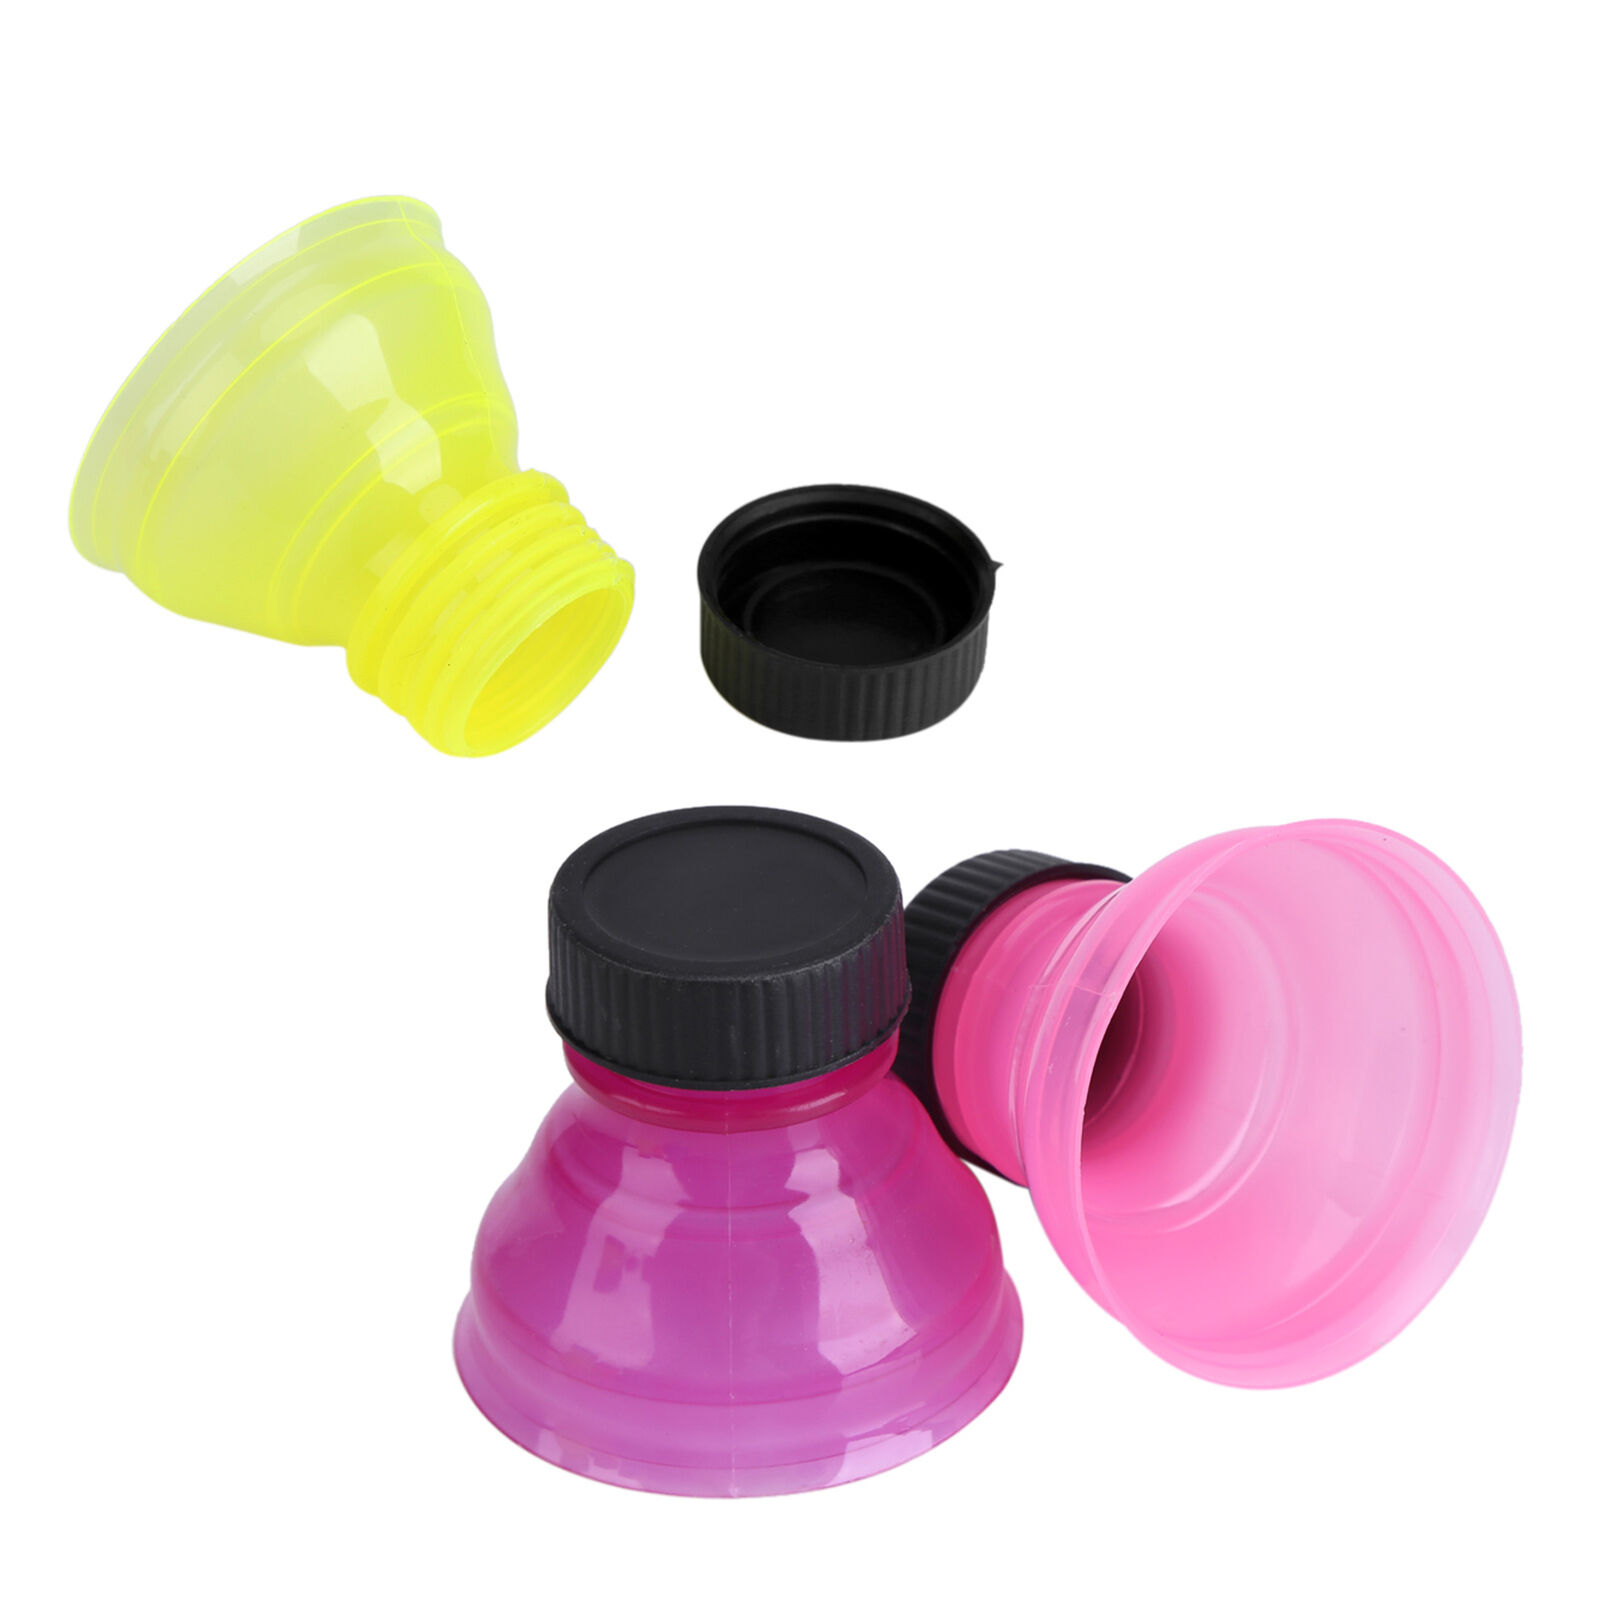 6Pcs Bottle Caps Reusable Bottle Caps For Cool Soda Drink Drink Unbranded Does not apply - фотография #14